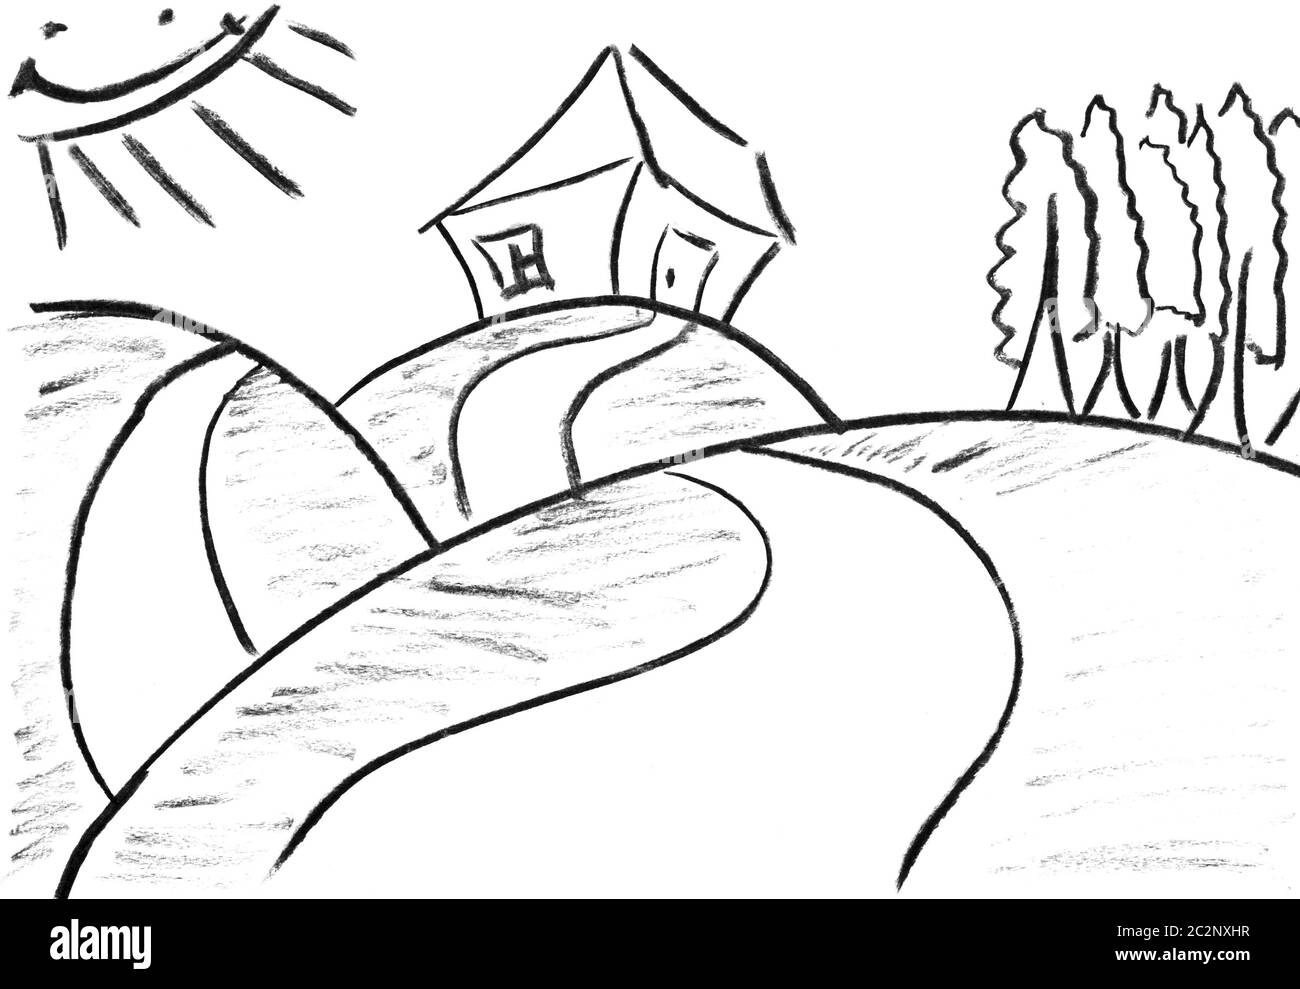 Hill Drawing Images  Free Download on Freepik